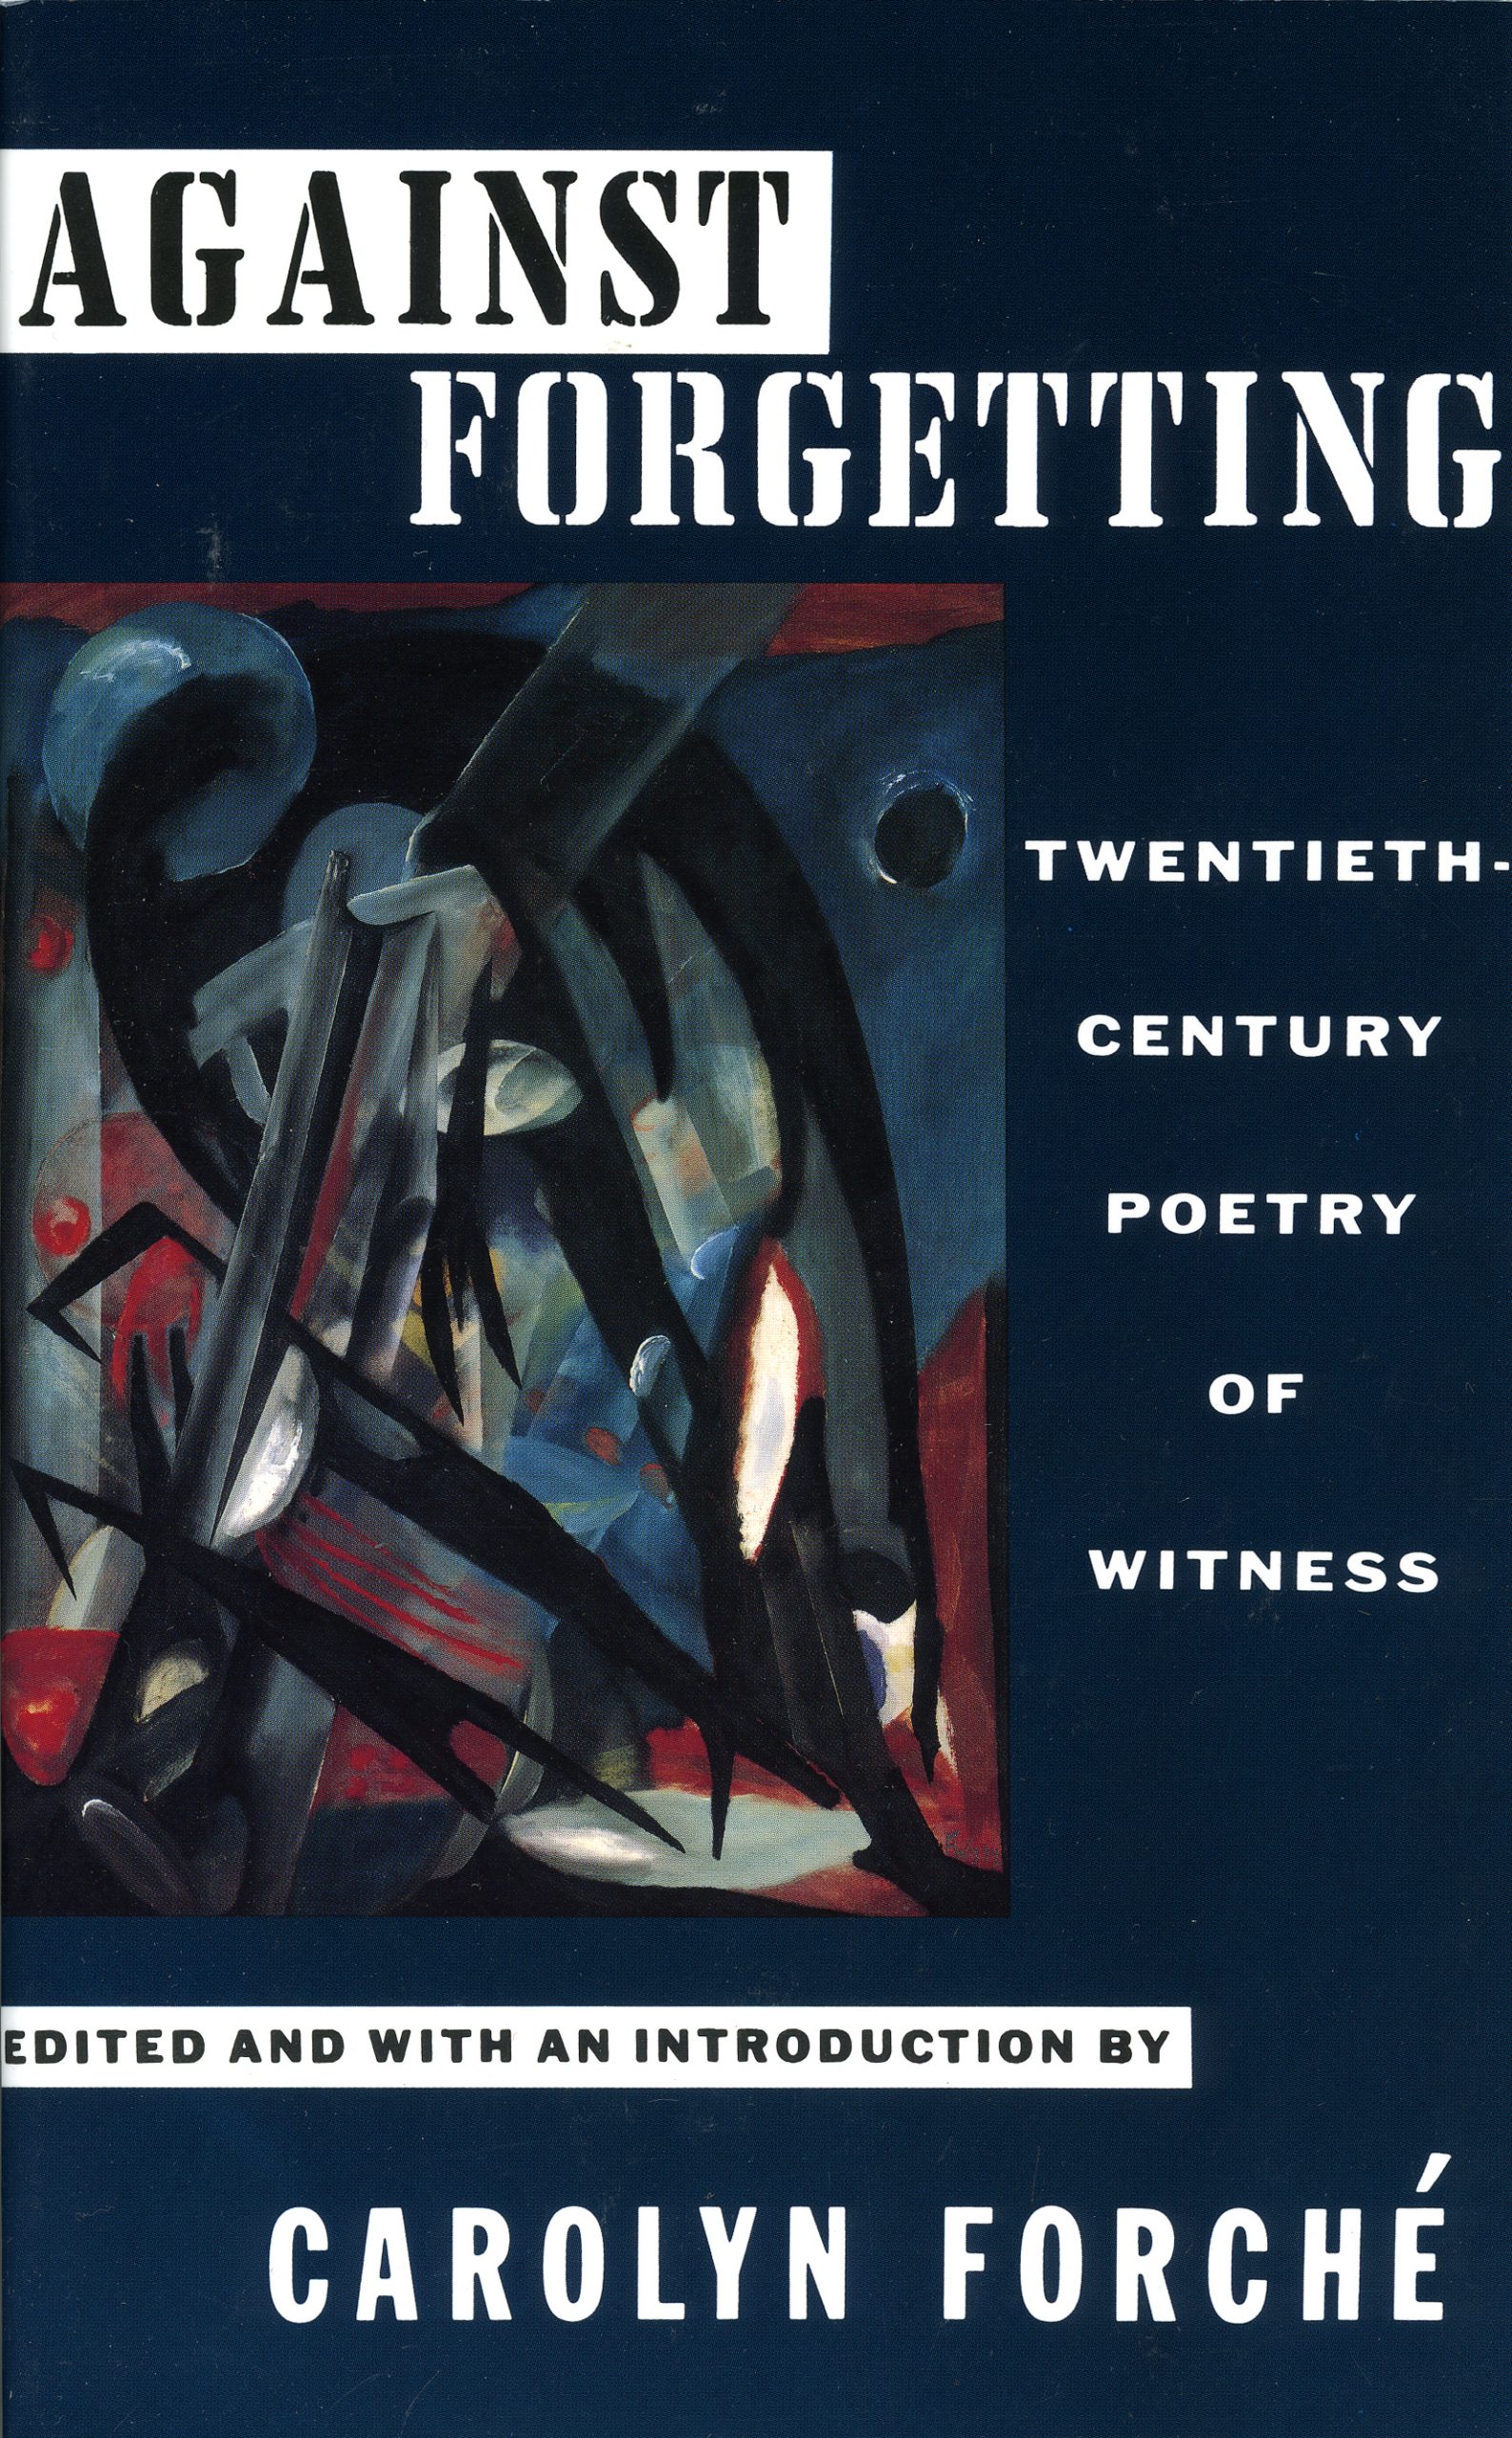 Against Forgetting by Carolyn Forché